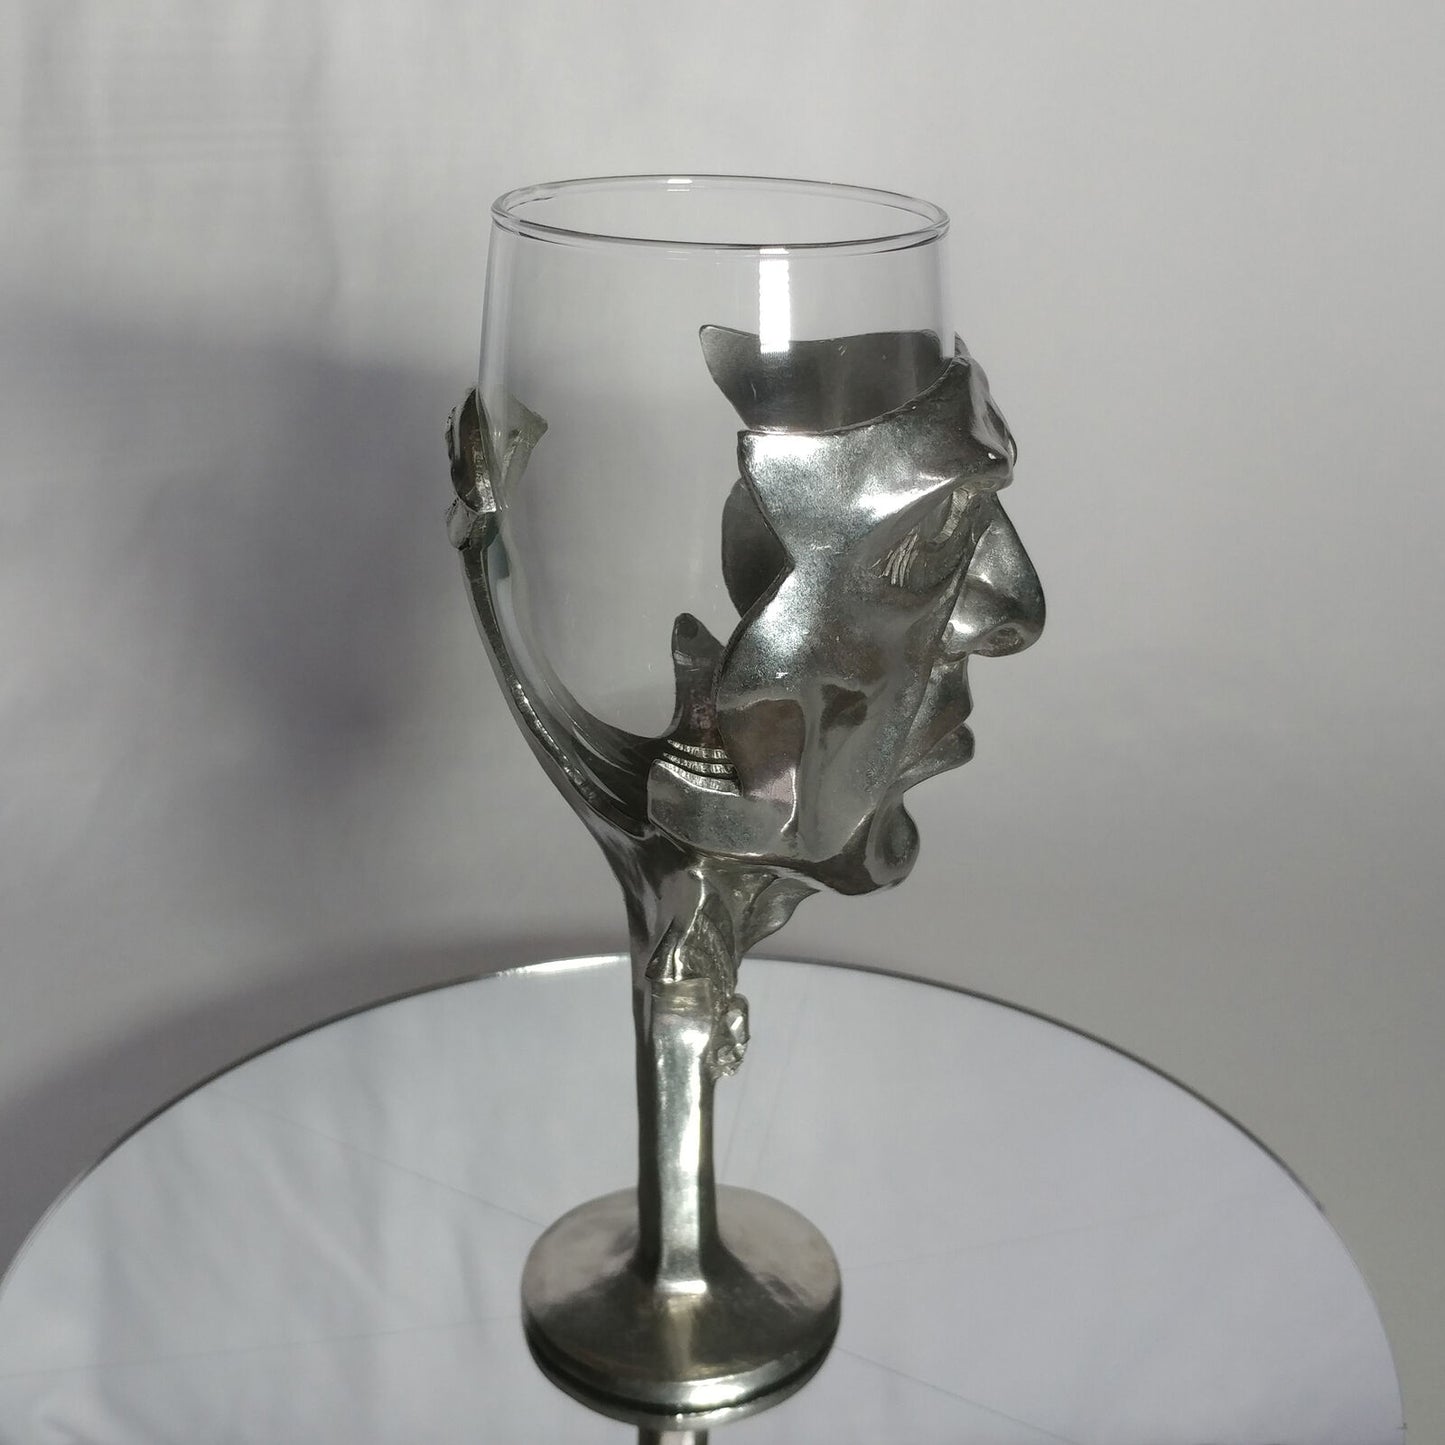 Royal Selangor | Lord of the Rings | Sauron Wine Glass